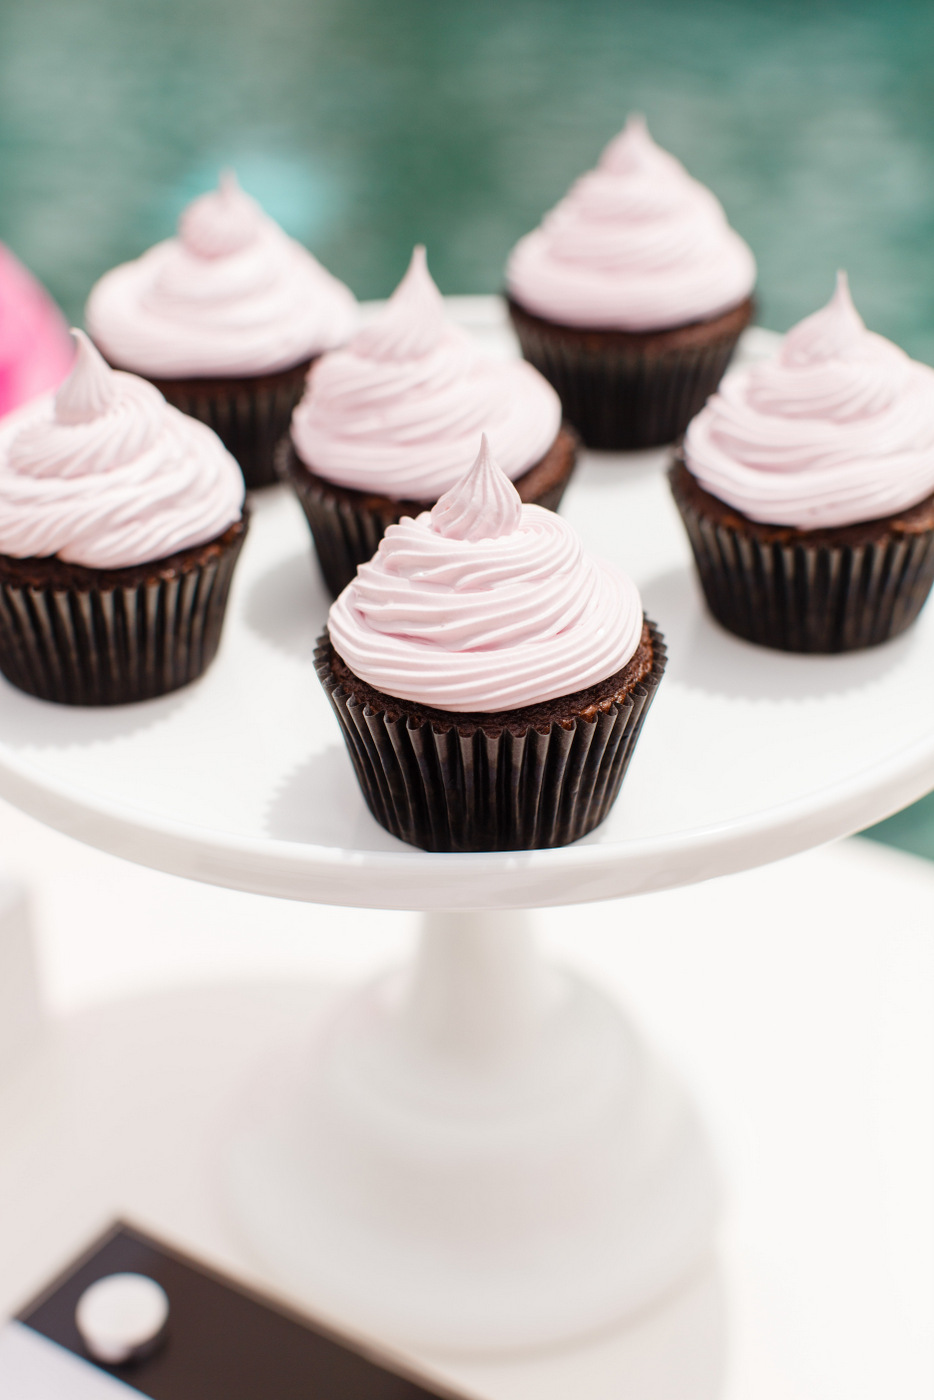 chocolate cupcakes with pink frosting - tomkat studio